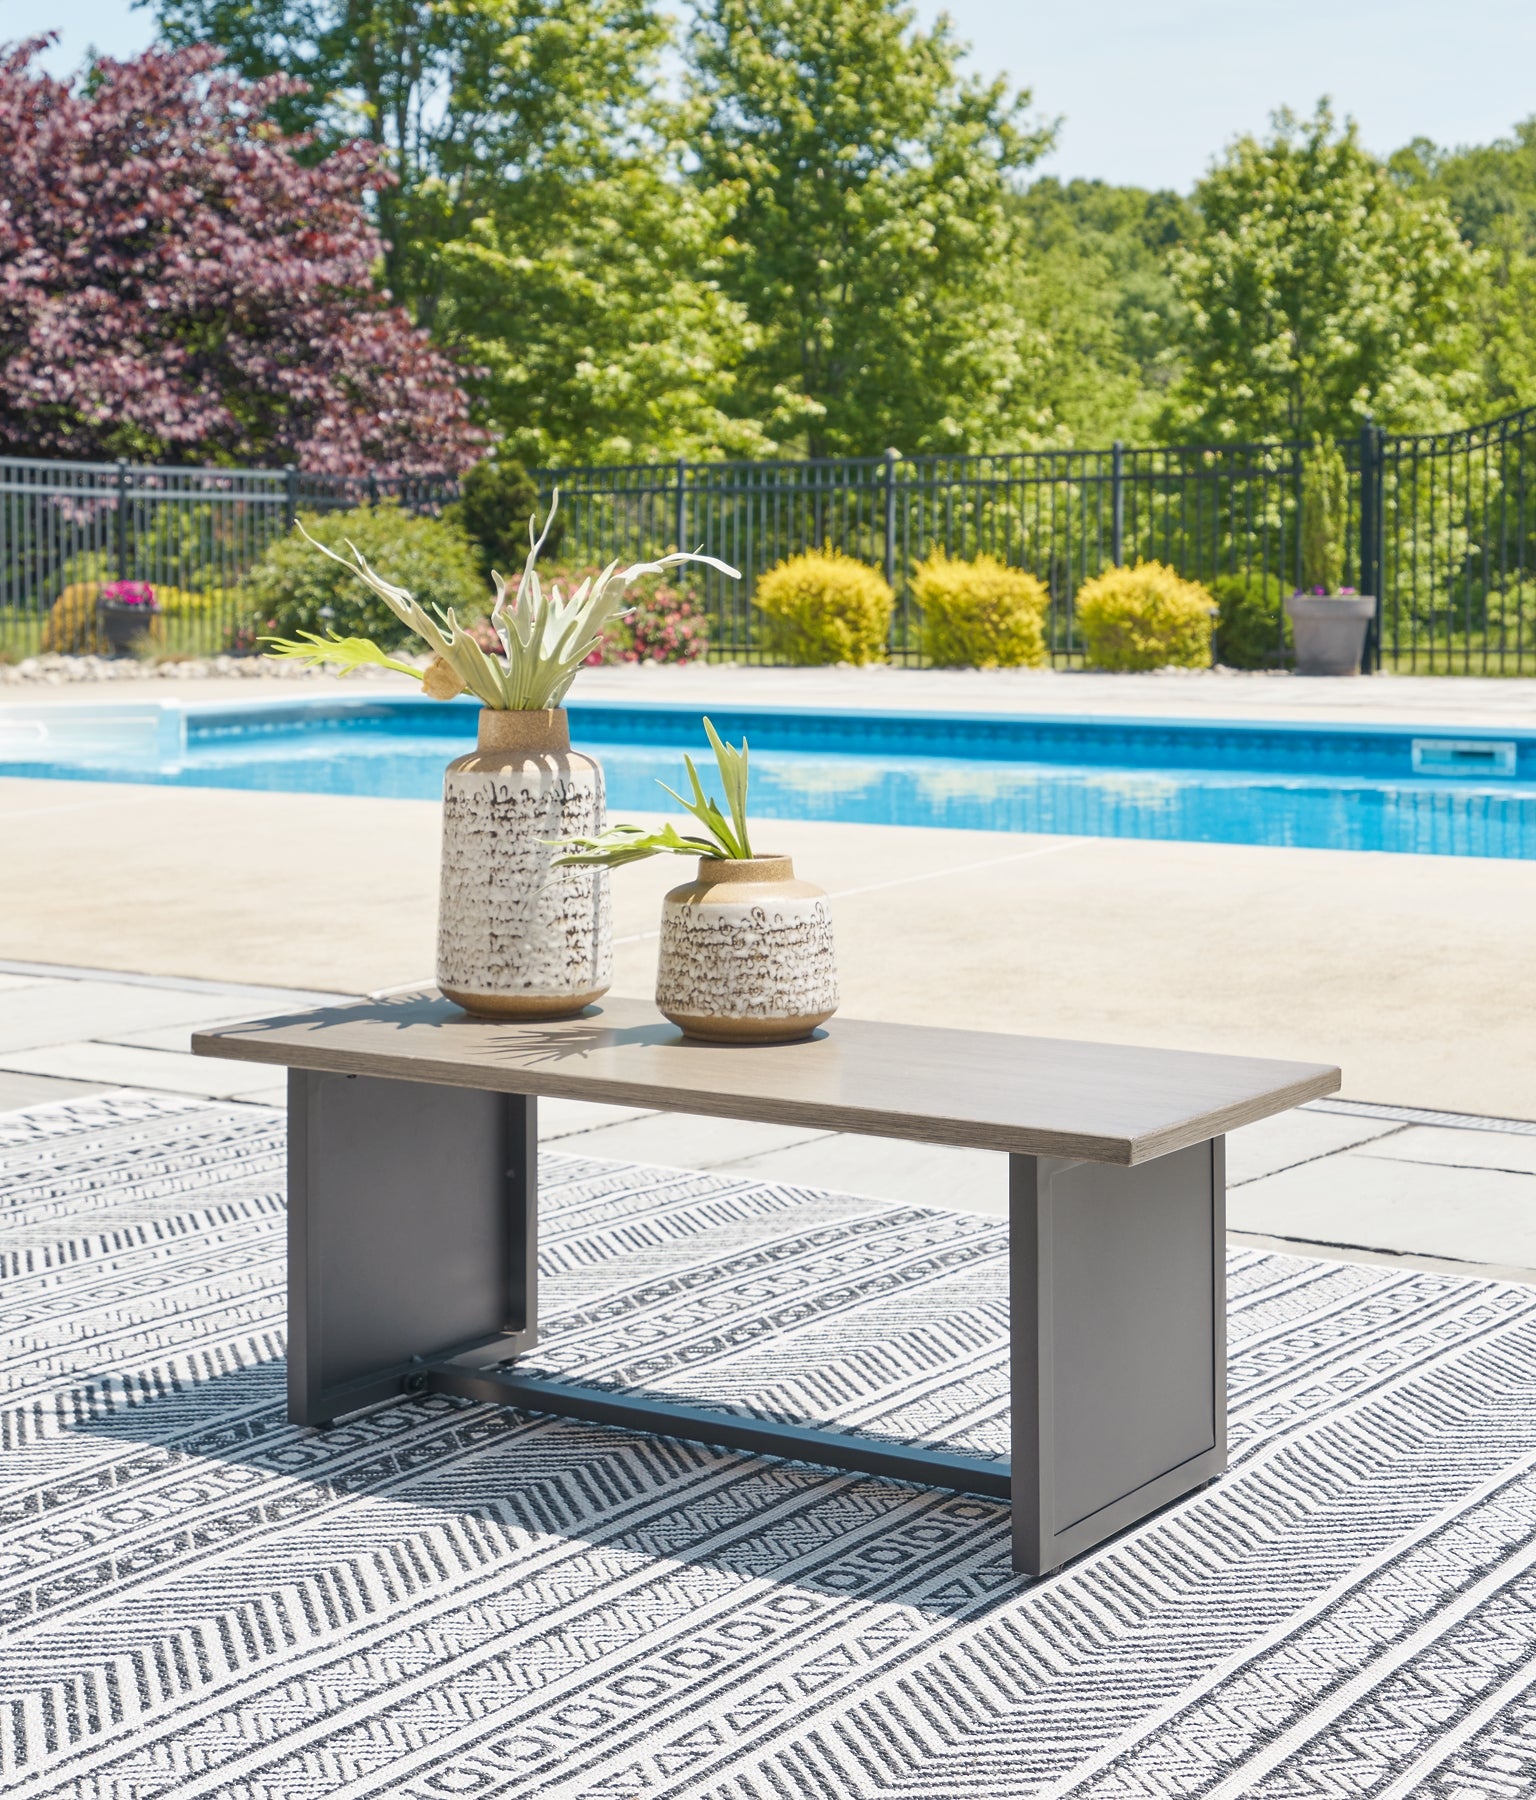 Bree Zee 7-Piece Outdoor Modular Seating Signature Design by Ashley®